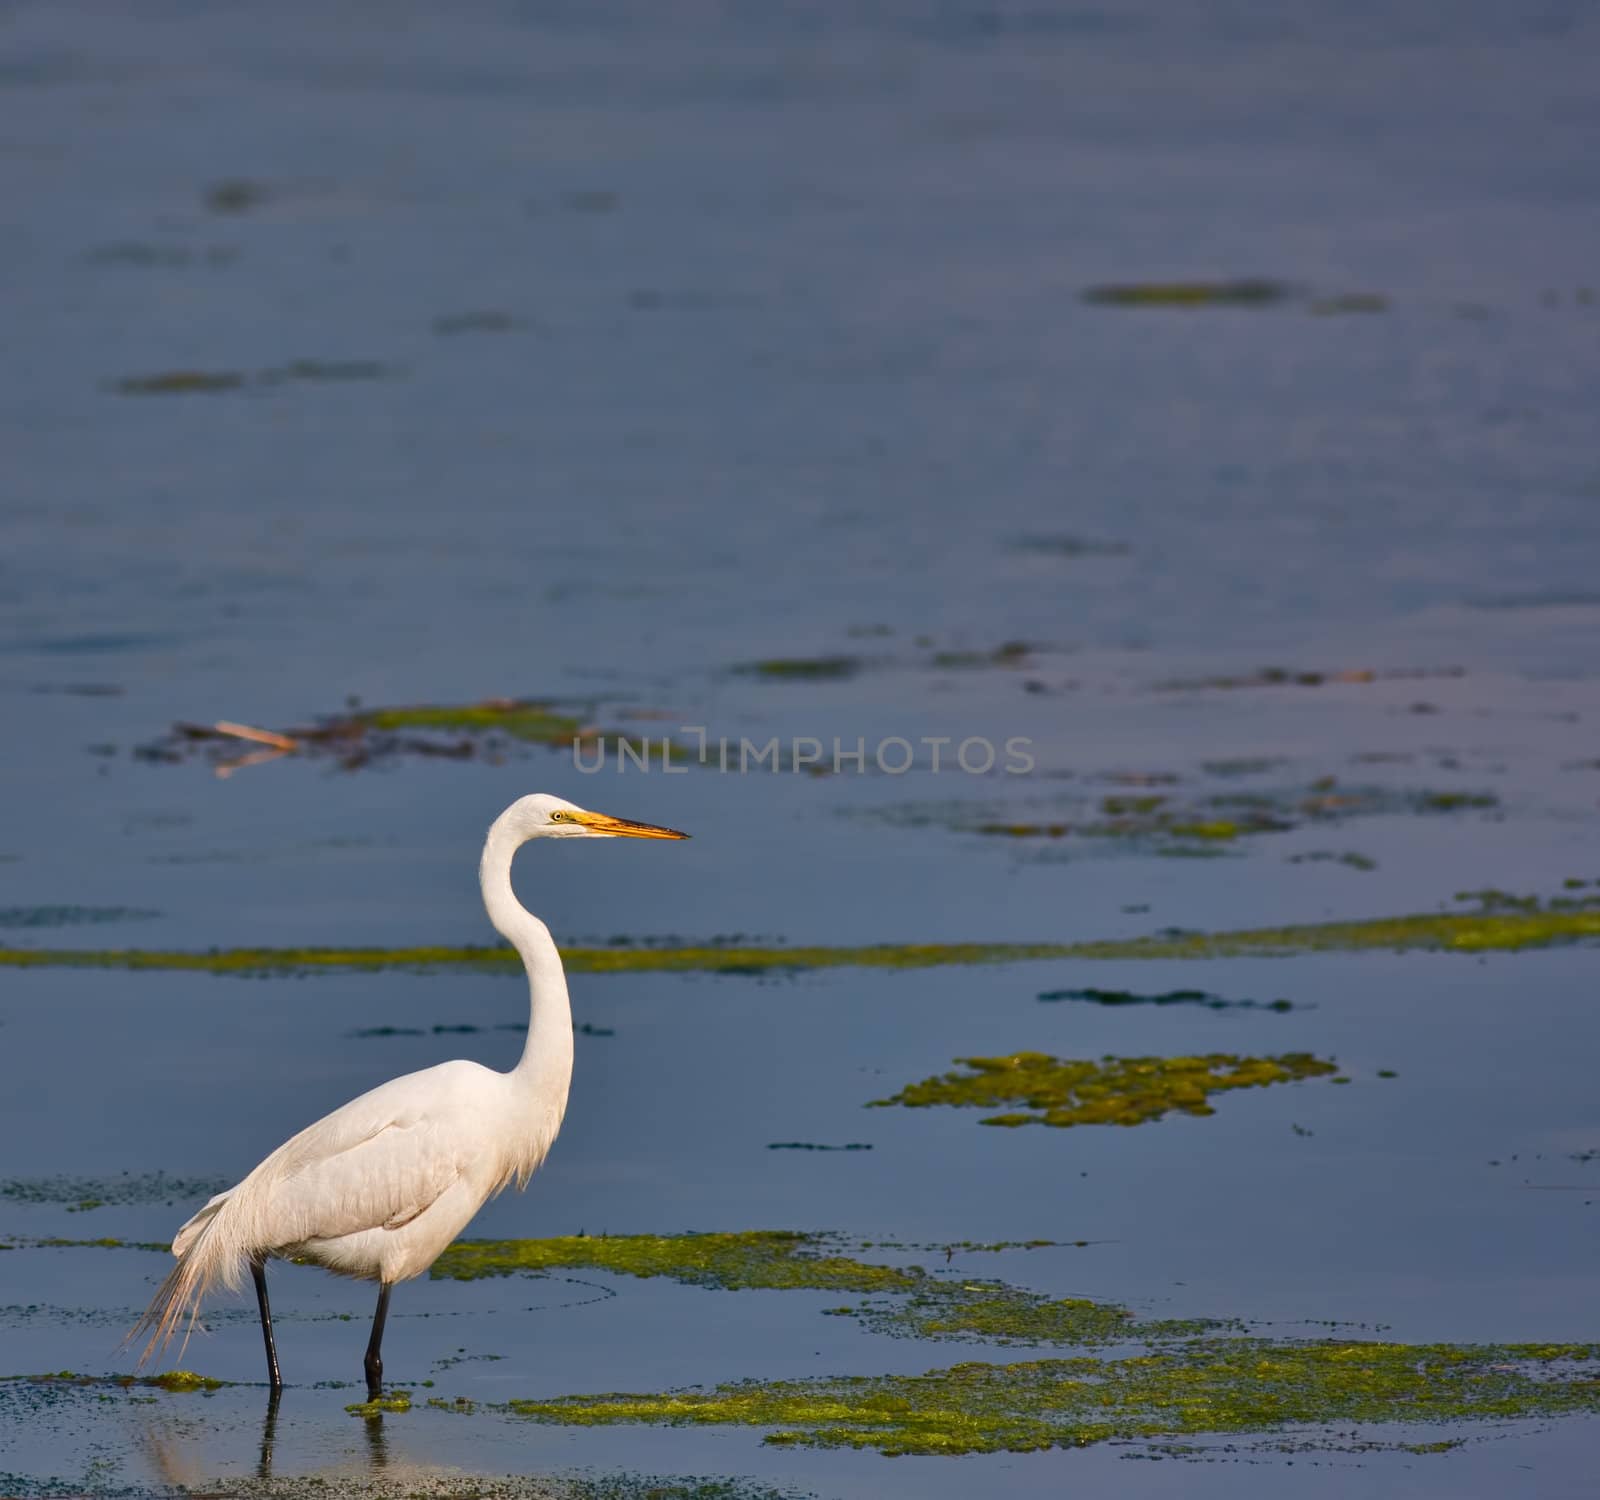 A great white egret in a salt water marsh. The egret is fairly small in the frame leaving plenty of room for text.